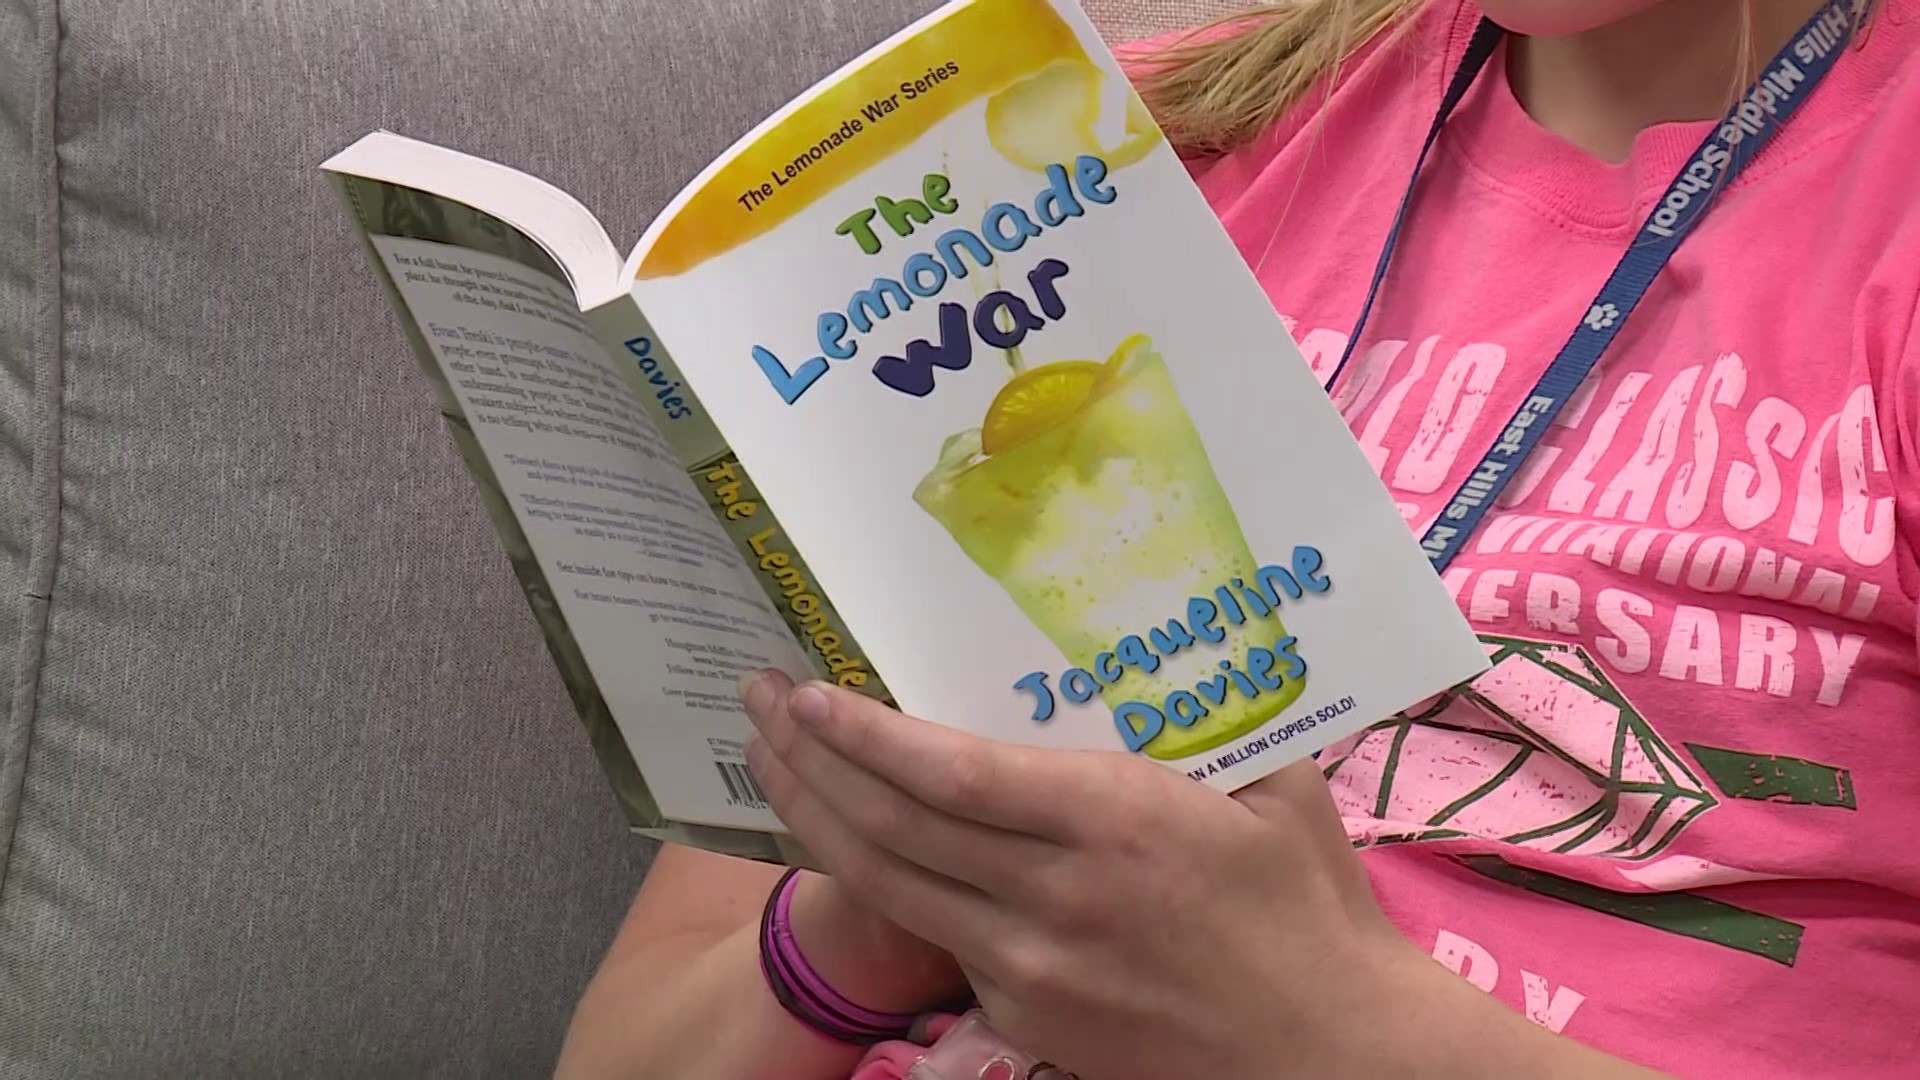 Pre-K through 6th-grade students are part of the program and get a copy of the book The Lemonade War to read.